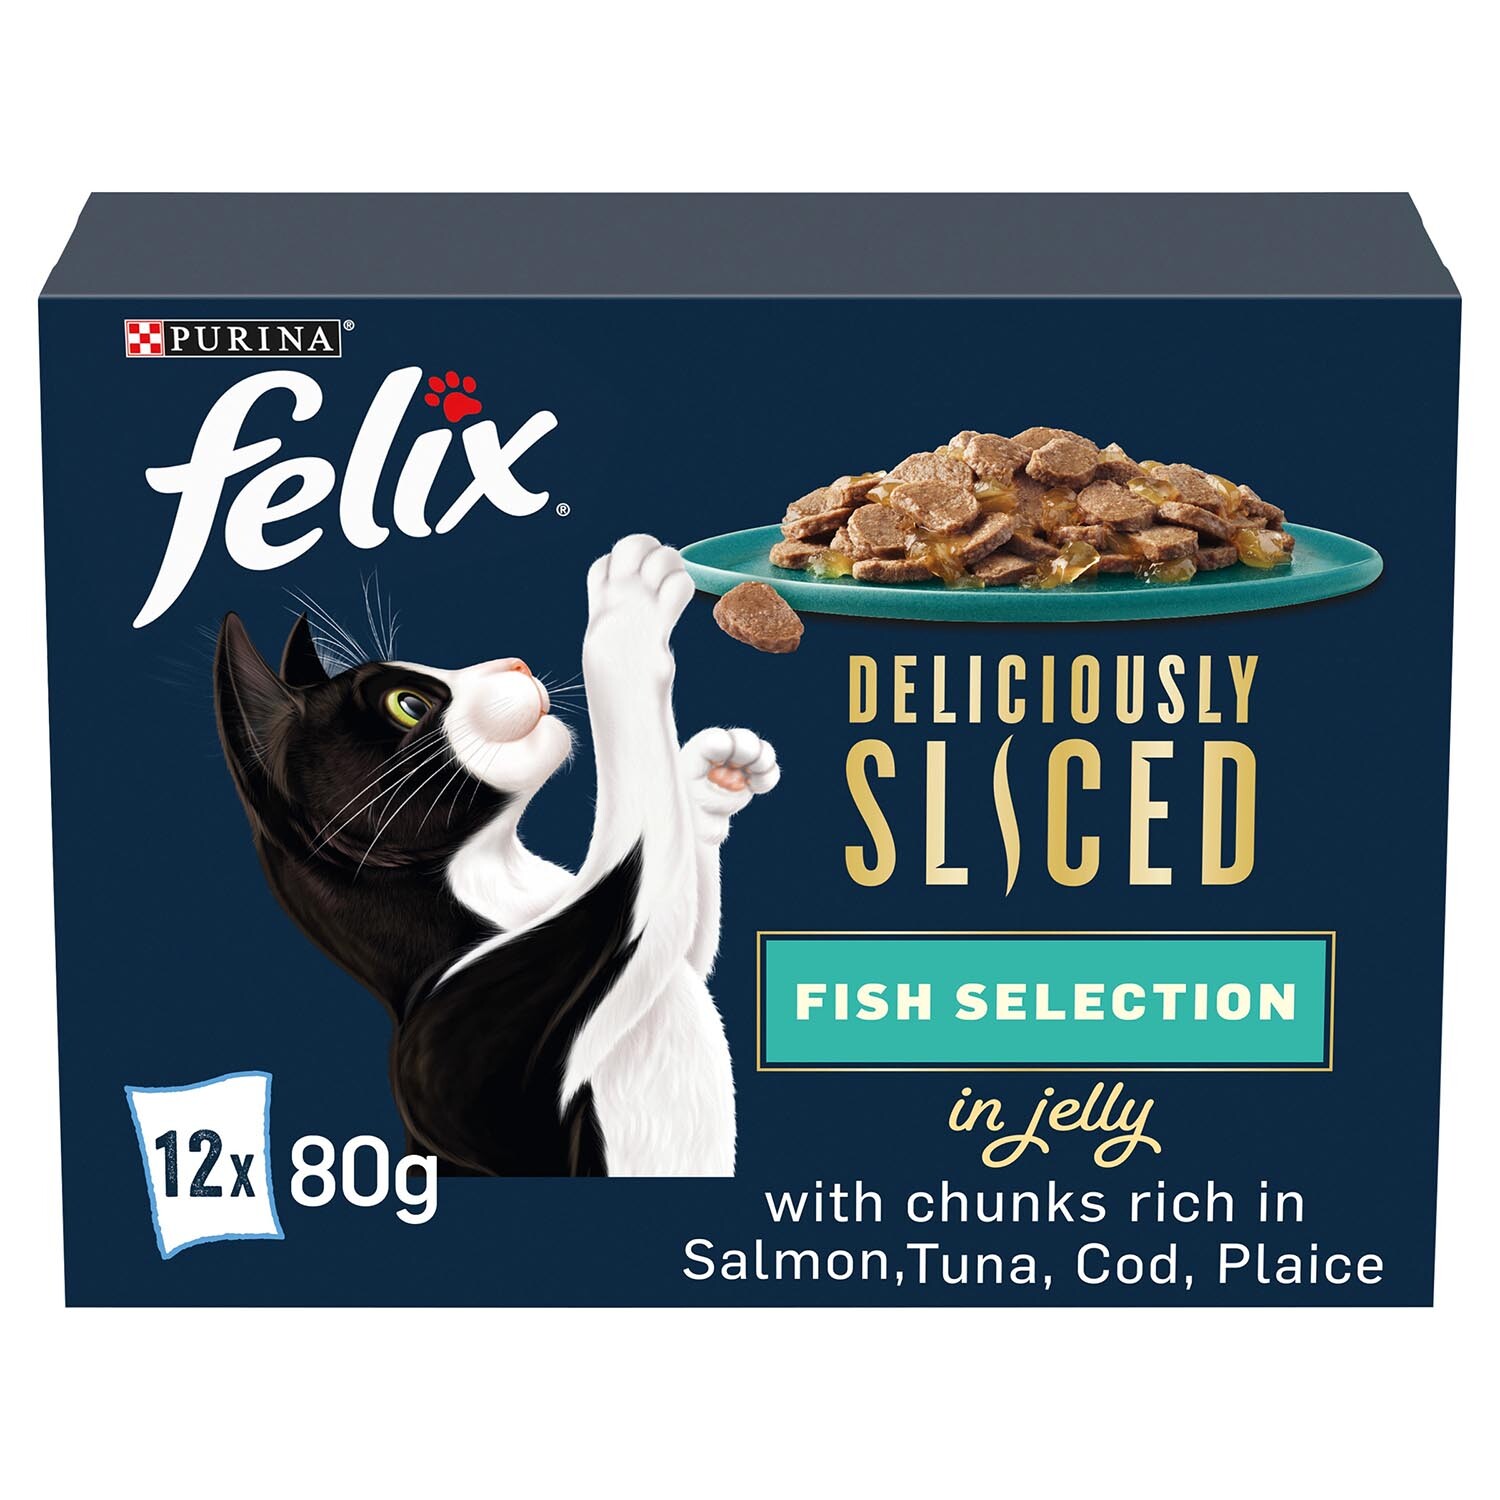 Purina Felix Deliciously Sliced Mixed Selection in Jelly Cat Food Image